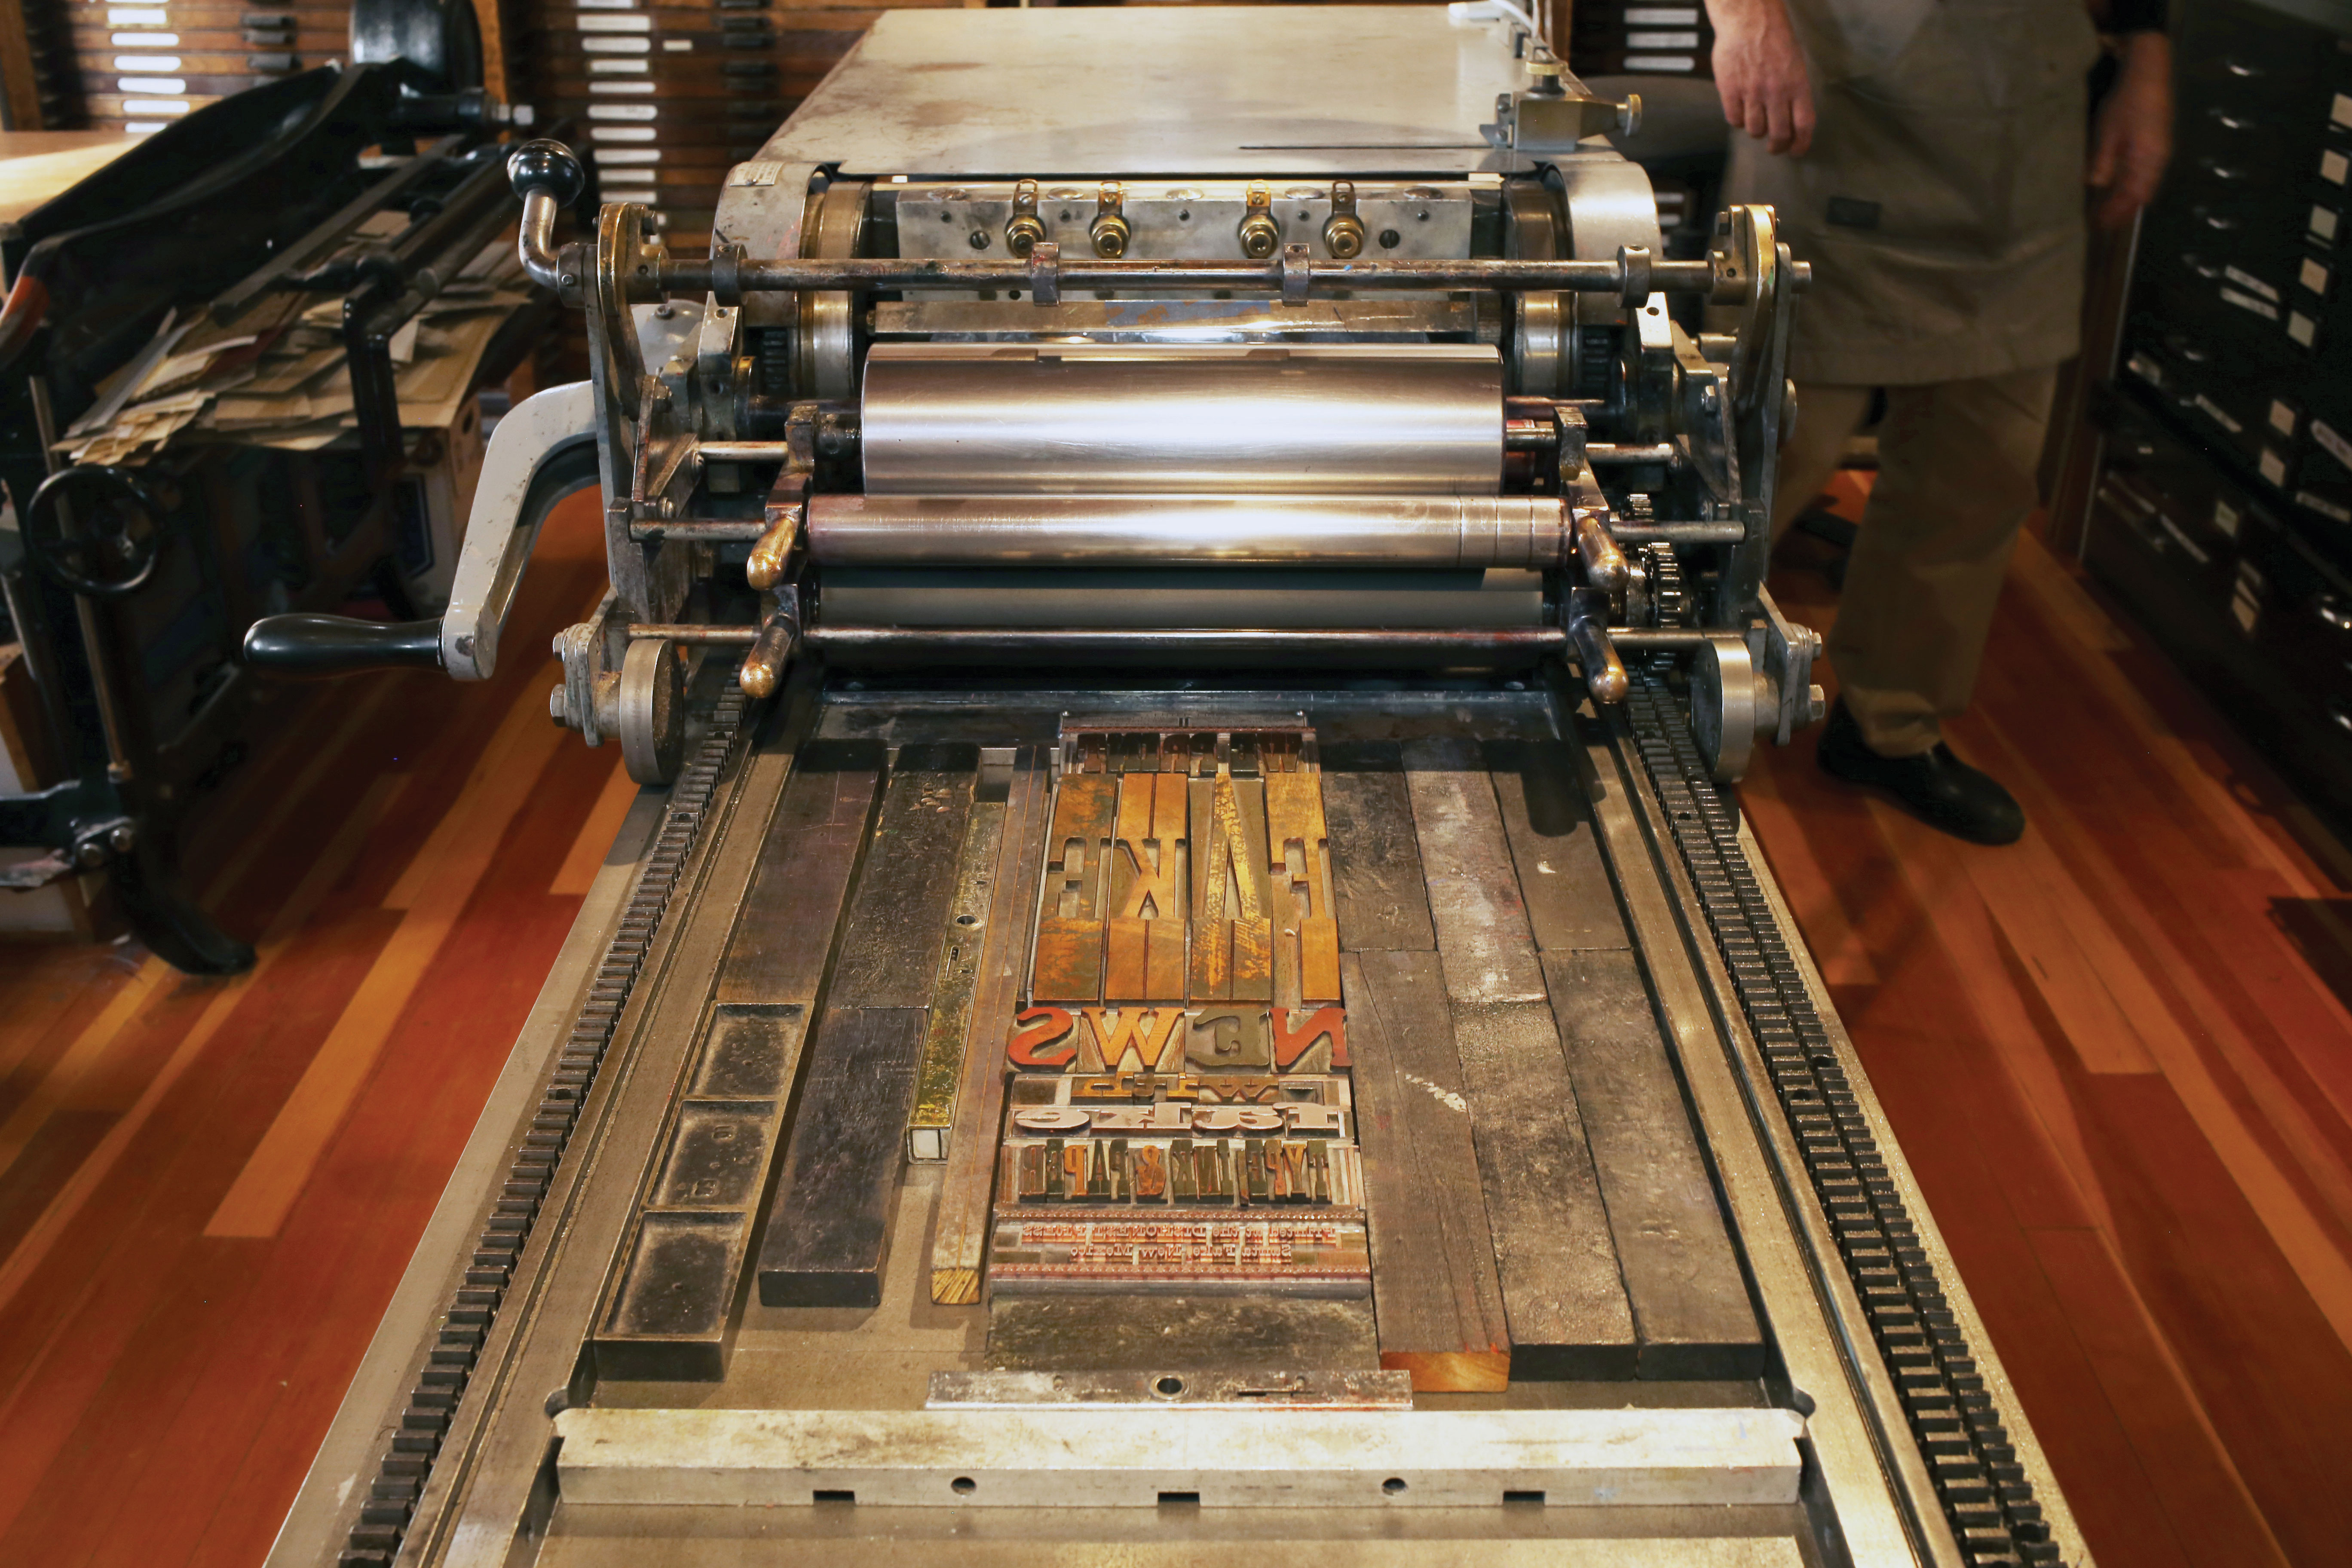 Up close to with the Vandercook Press.